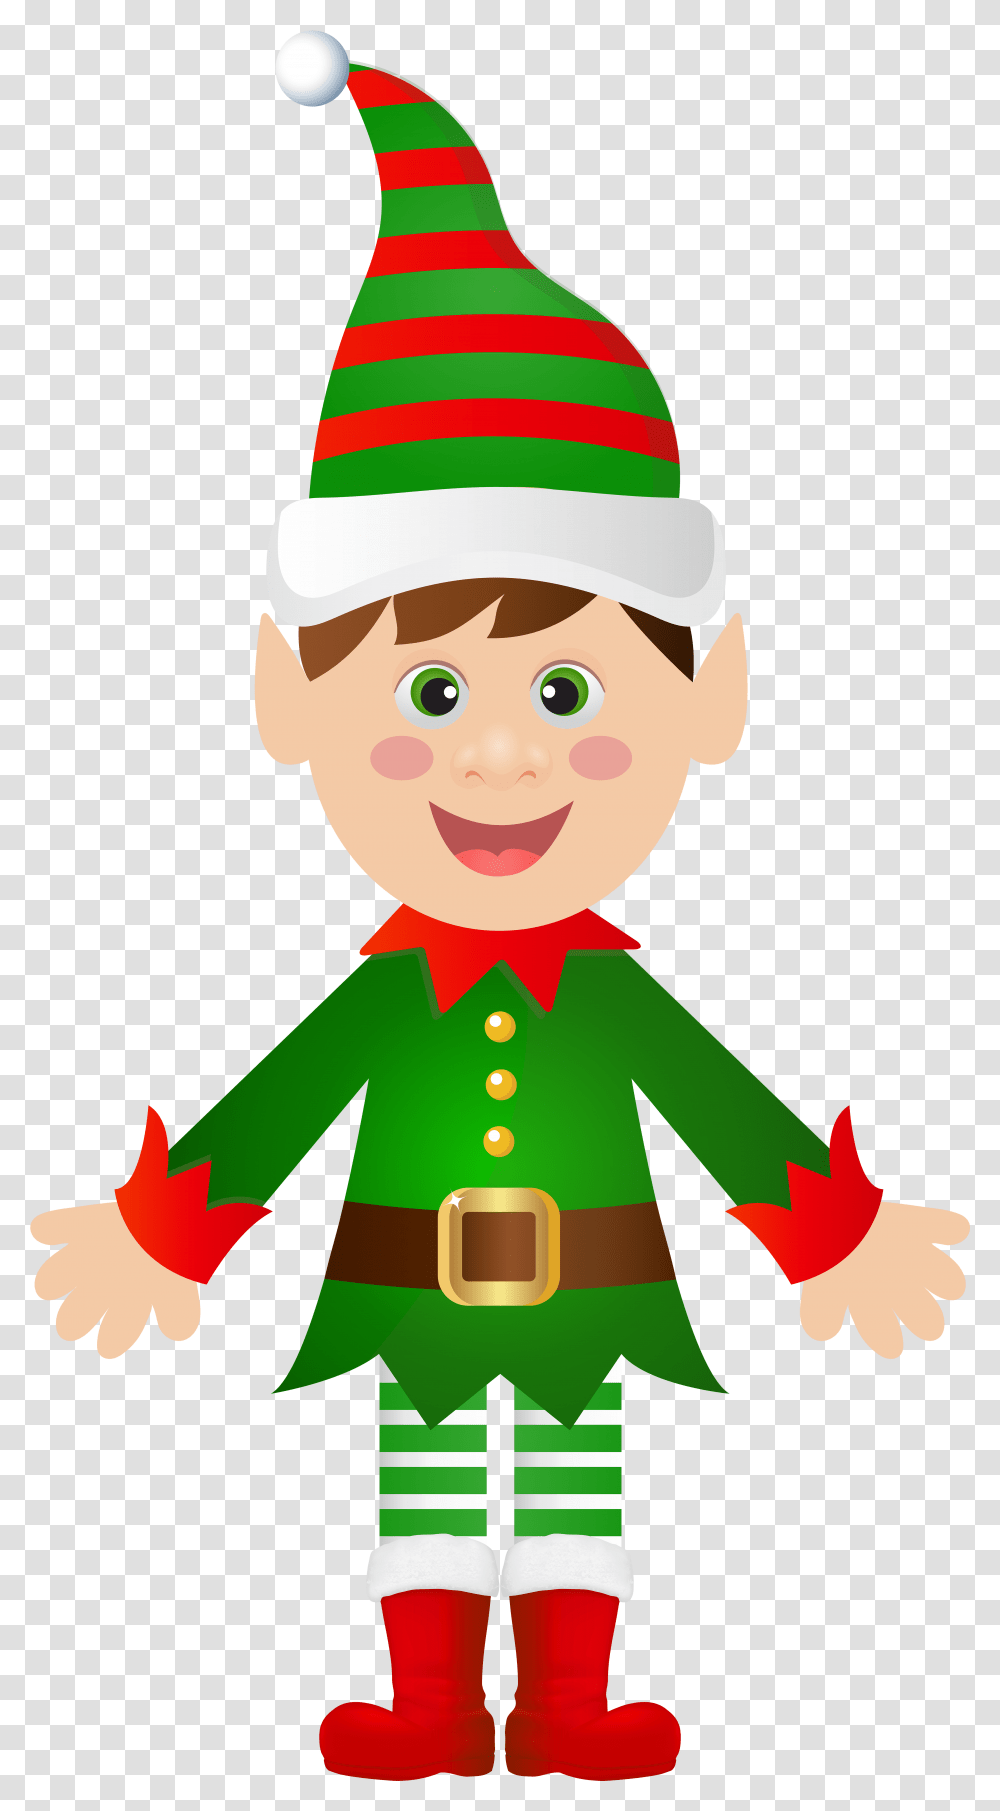 Background Christmas Elf Clipart Clipart Christmas Elf, Performer, Recycling Symbol Transparent Png